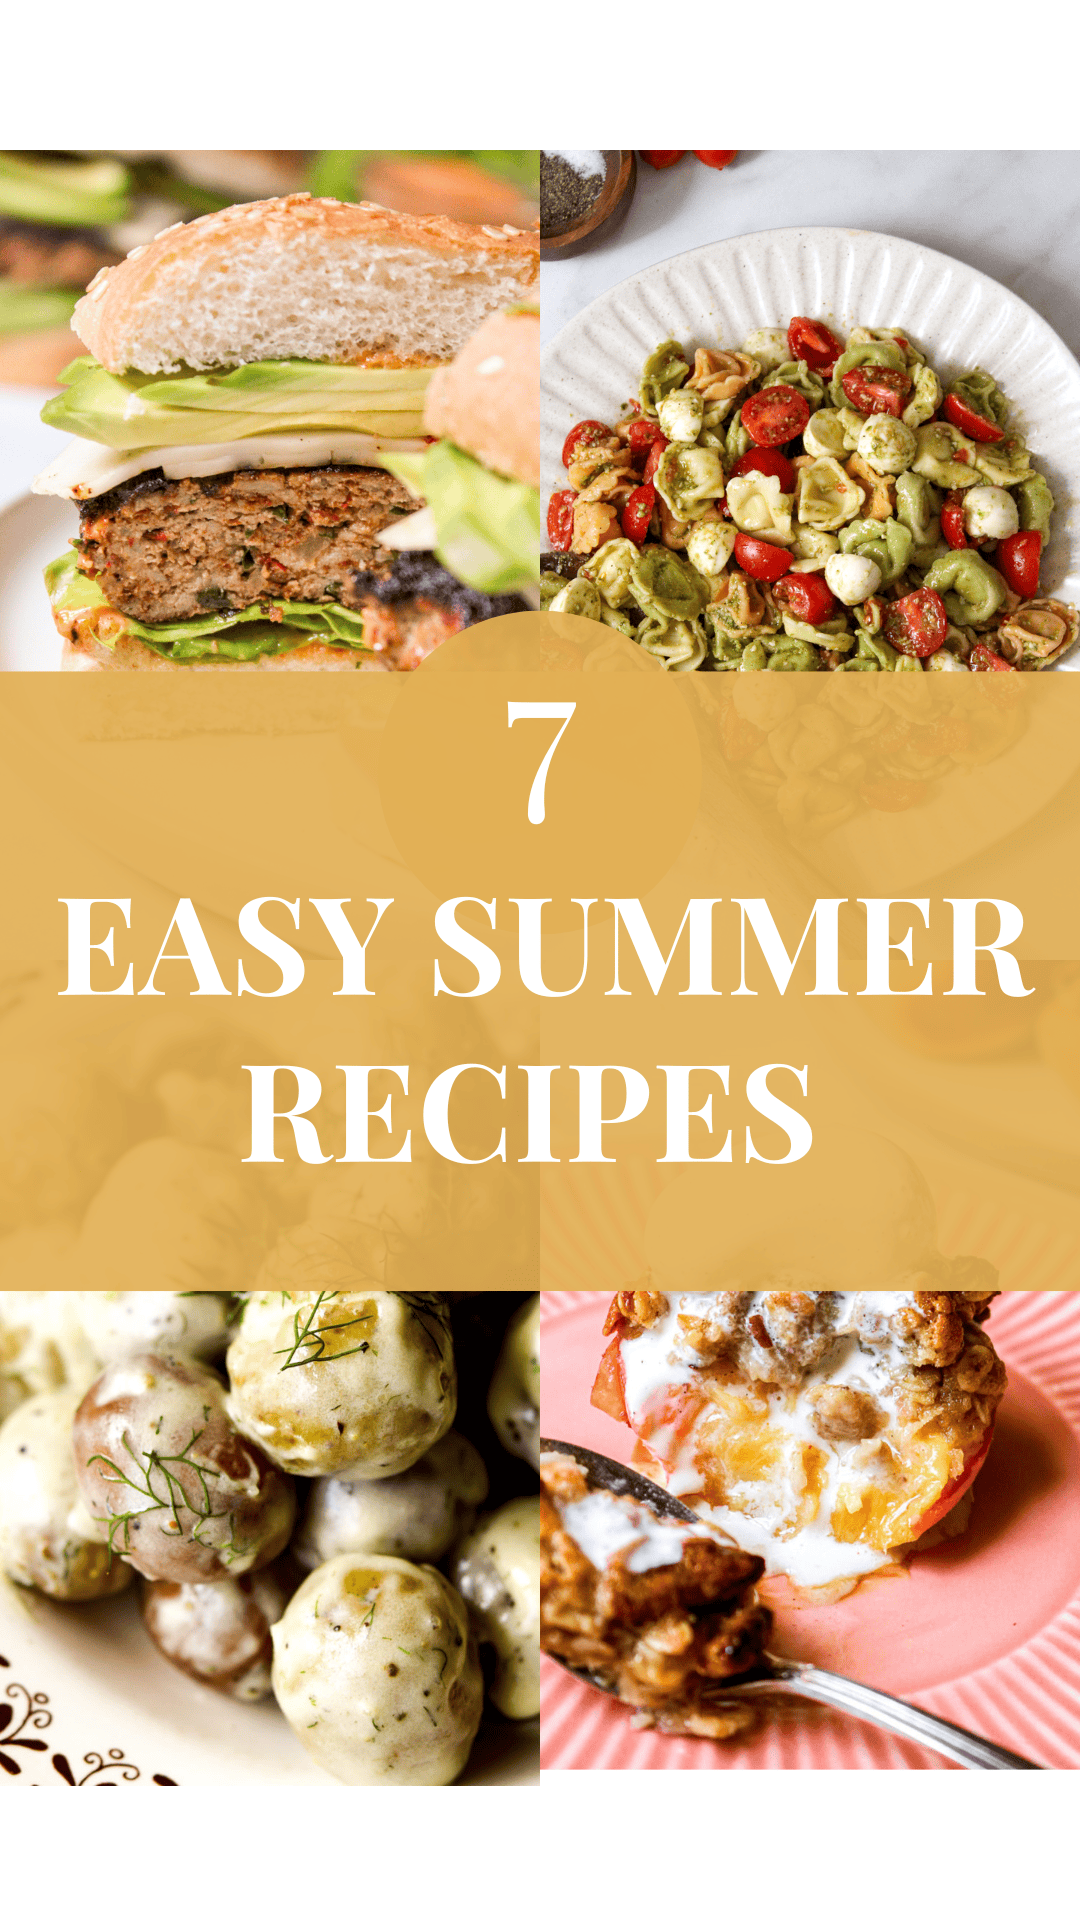 white text that reads "7 easy summer recipes" in a semi-transparent yellow box layed over 4 images of summer recipes